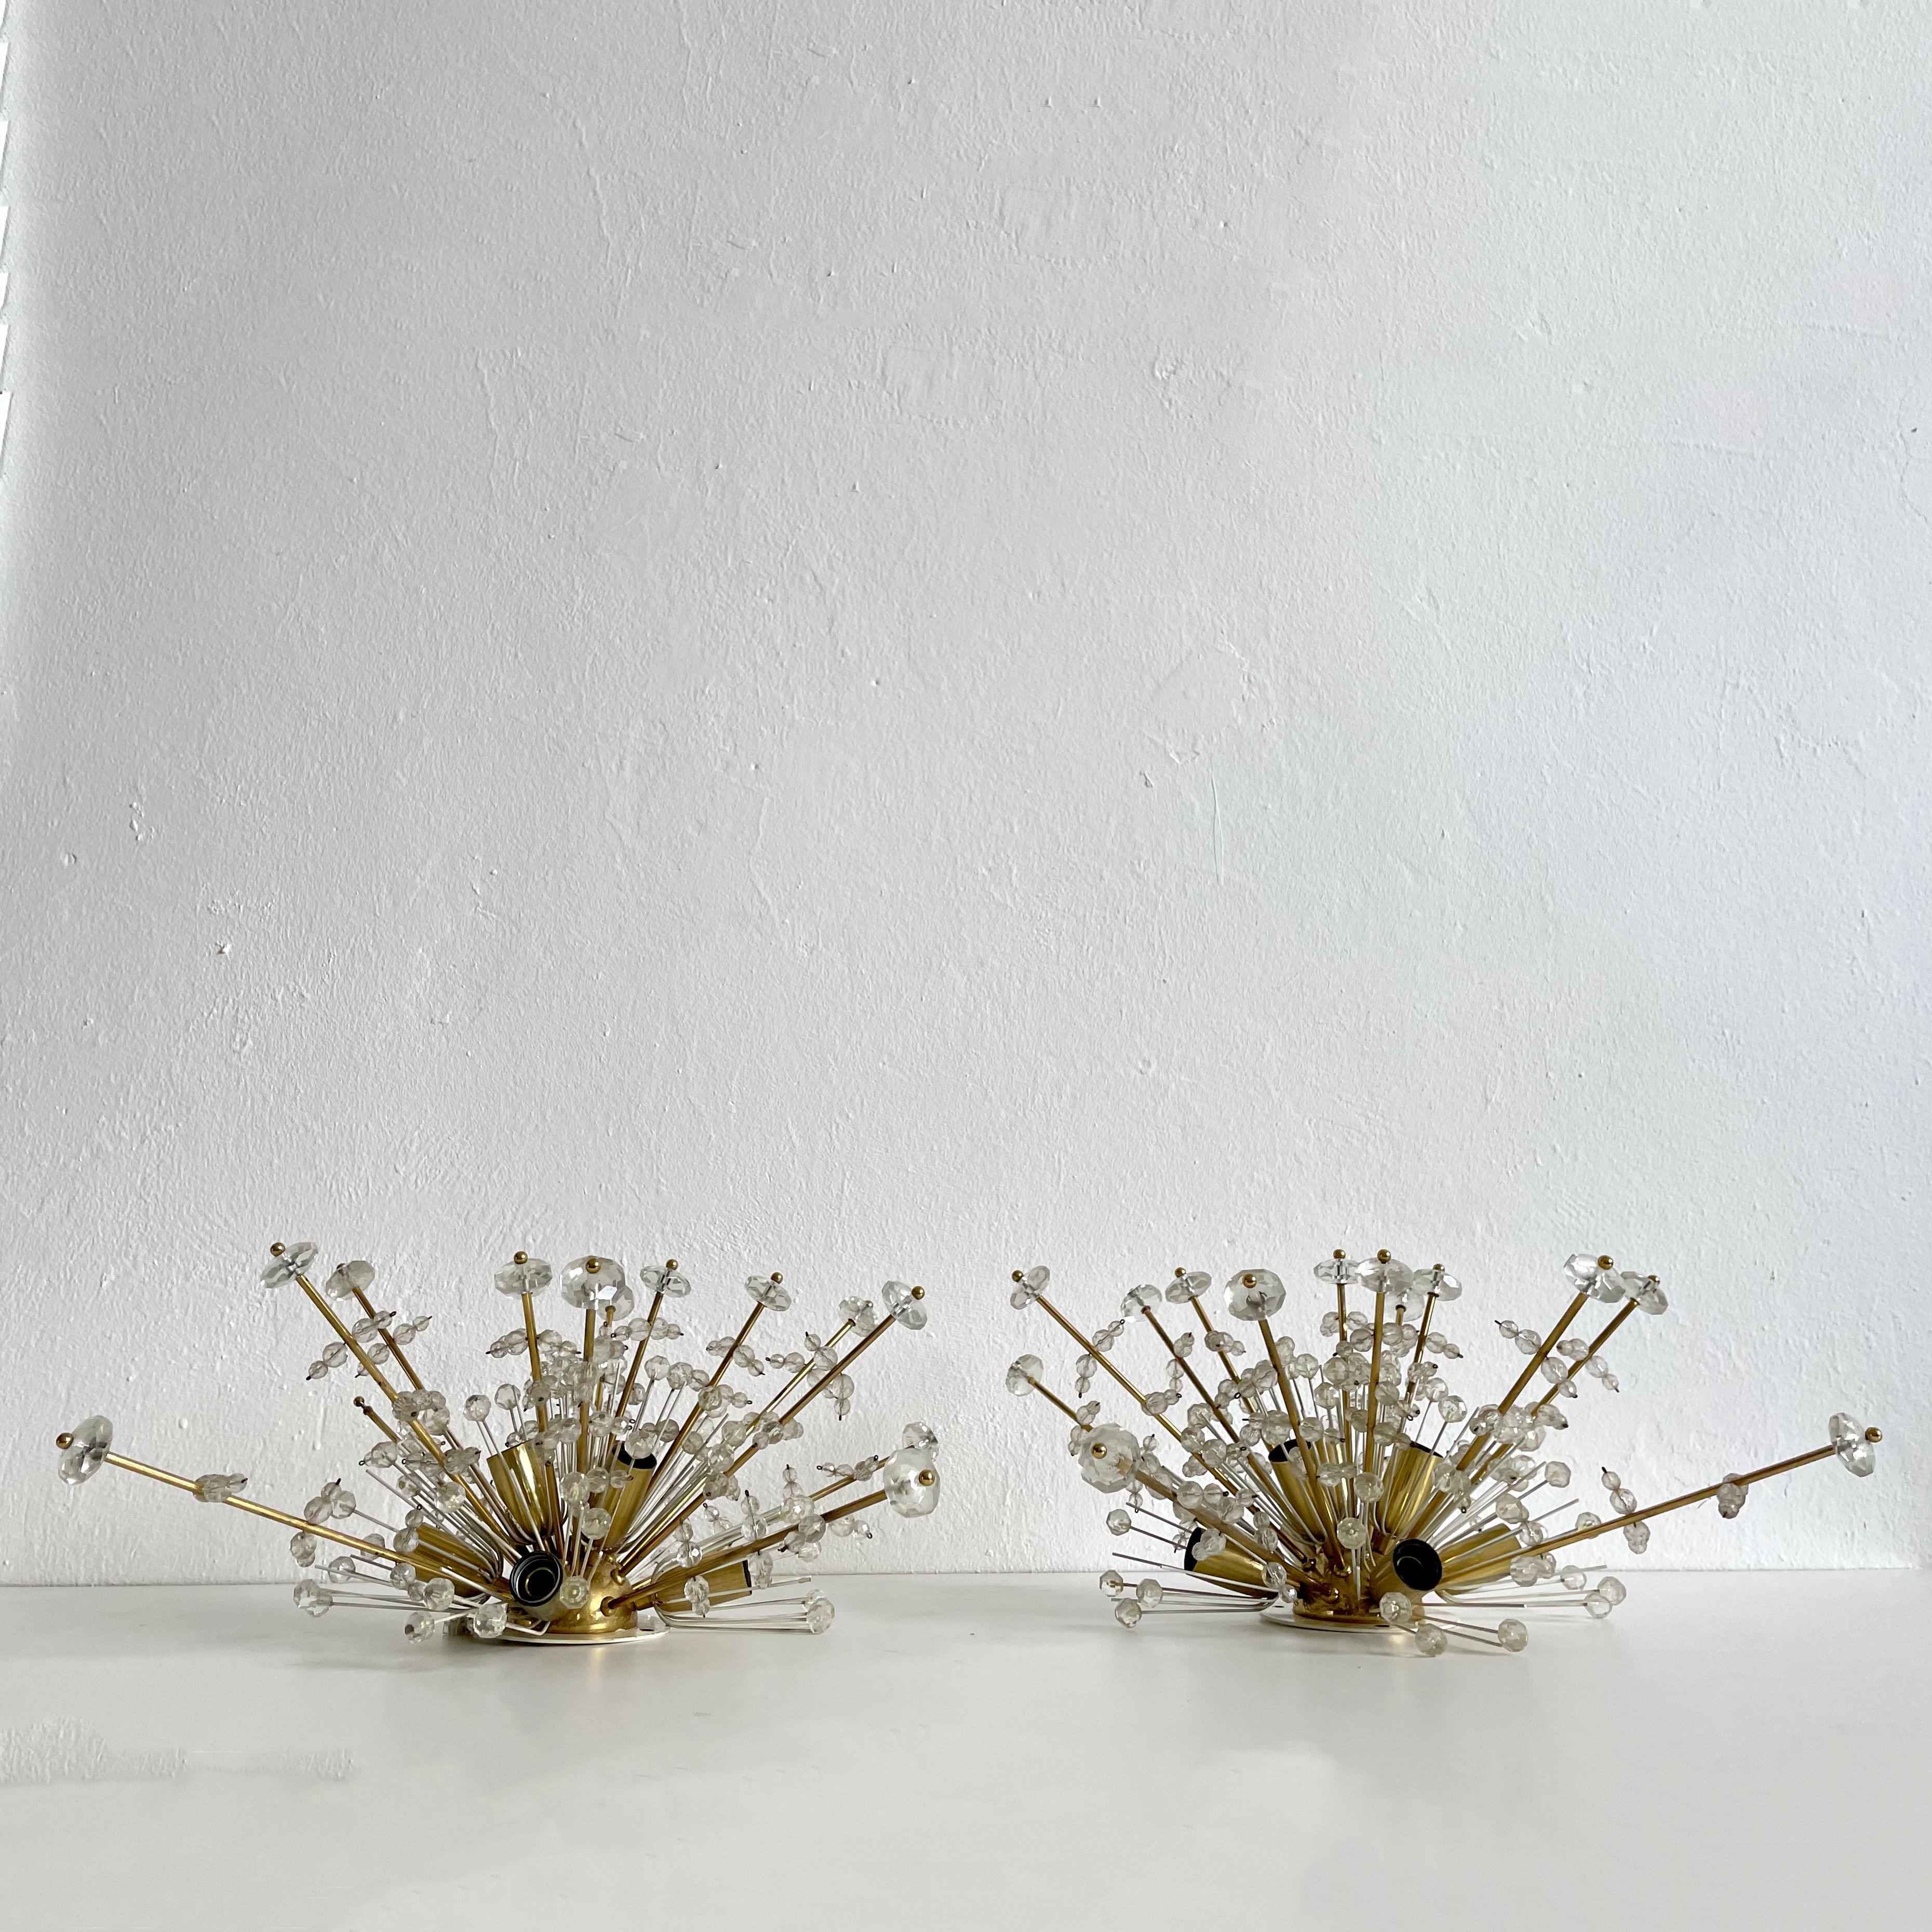 Pair of snowflake crystal flush mount lights designed by Emil Stejnar and produced by Nikoll, Austria 1950s

The lamps have 7 lamp sockets for standard Edison E14 bulbs

Both lamps are in very good original condition and fully functional as